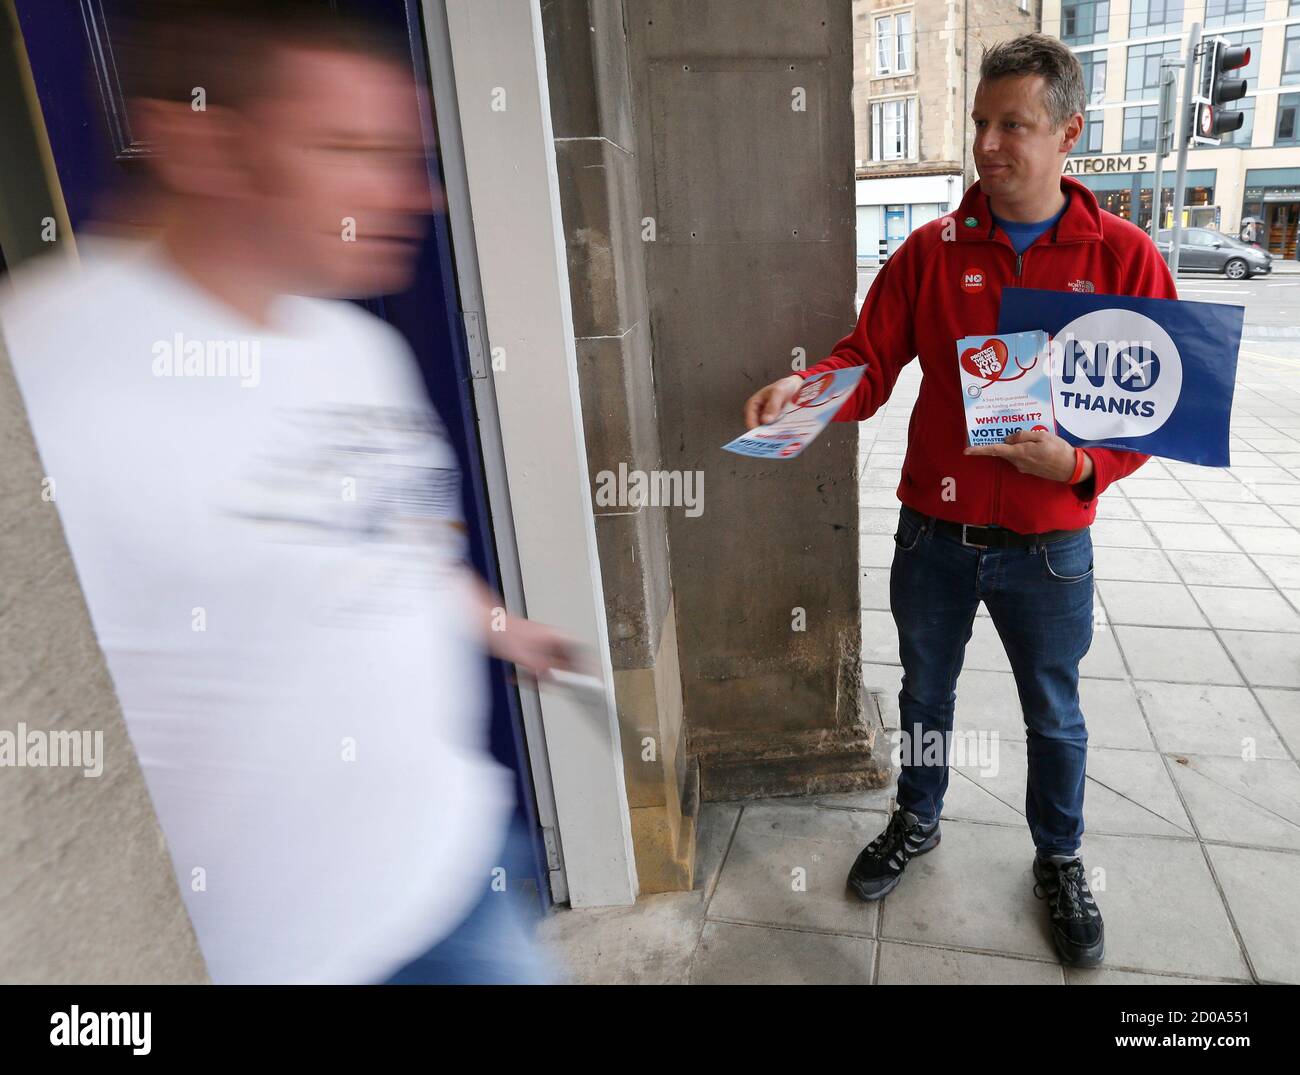 A 'No' campaigner hands out leaflets to commuters as they arrive at Edinburgh's Haymarket station, in Scotland September 17, 2014. The referendum on Scottish independence will take place on September 18, when Scotland will vote whether or not to end the 307-year-old union with the rest of the United Kingdom.        REUTERS/Russell Cheyne (BRITAIN  - Tags: POLITICS ELECTIONS) Stock Photo